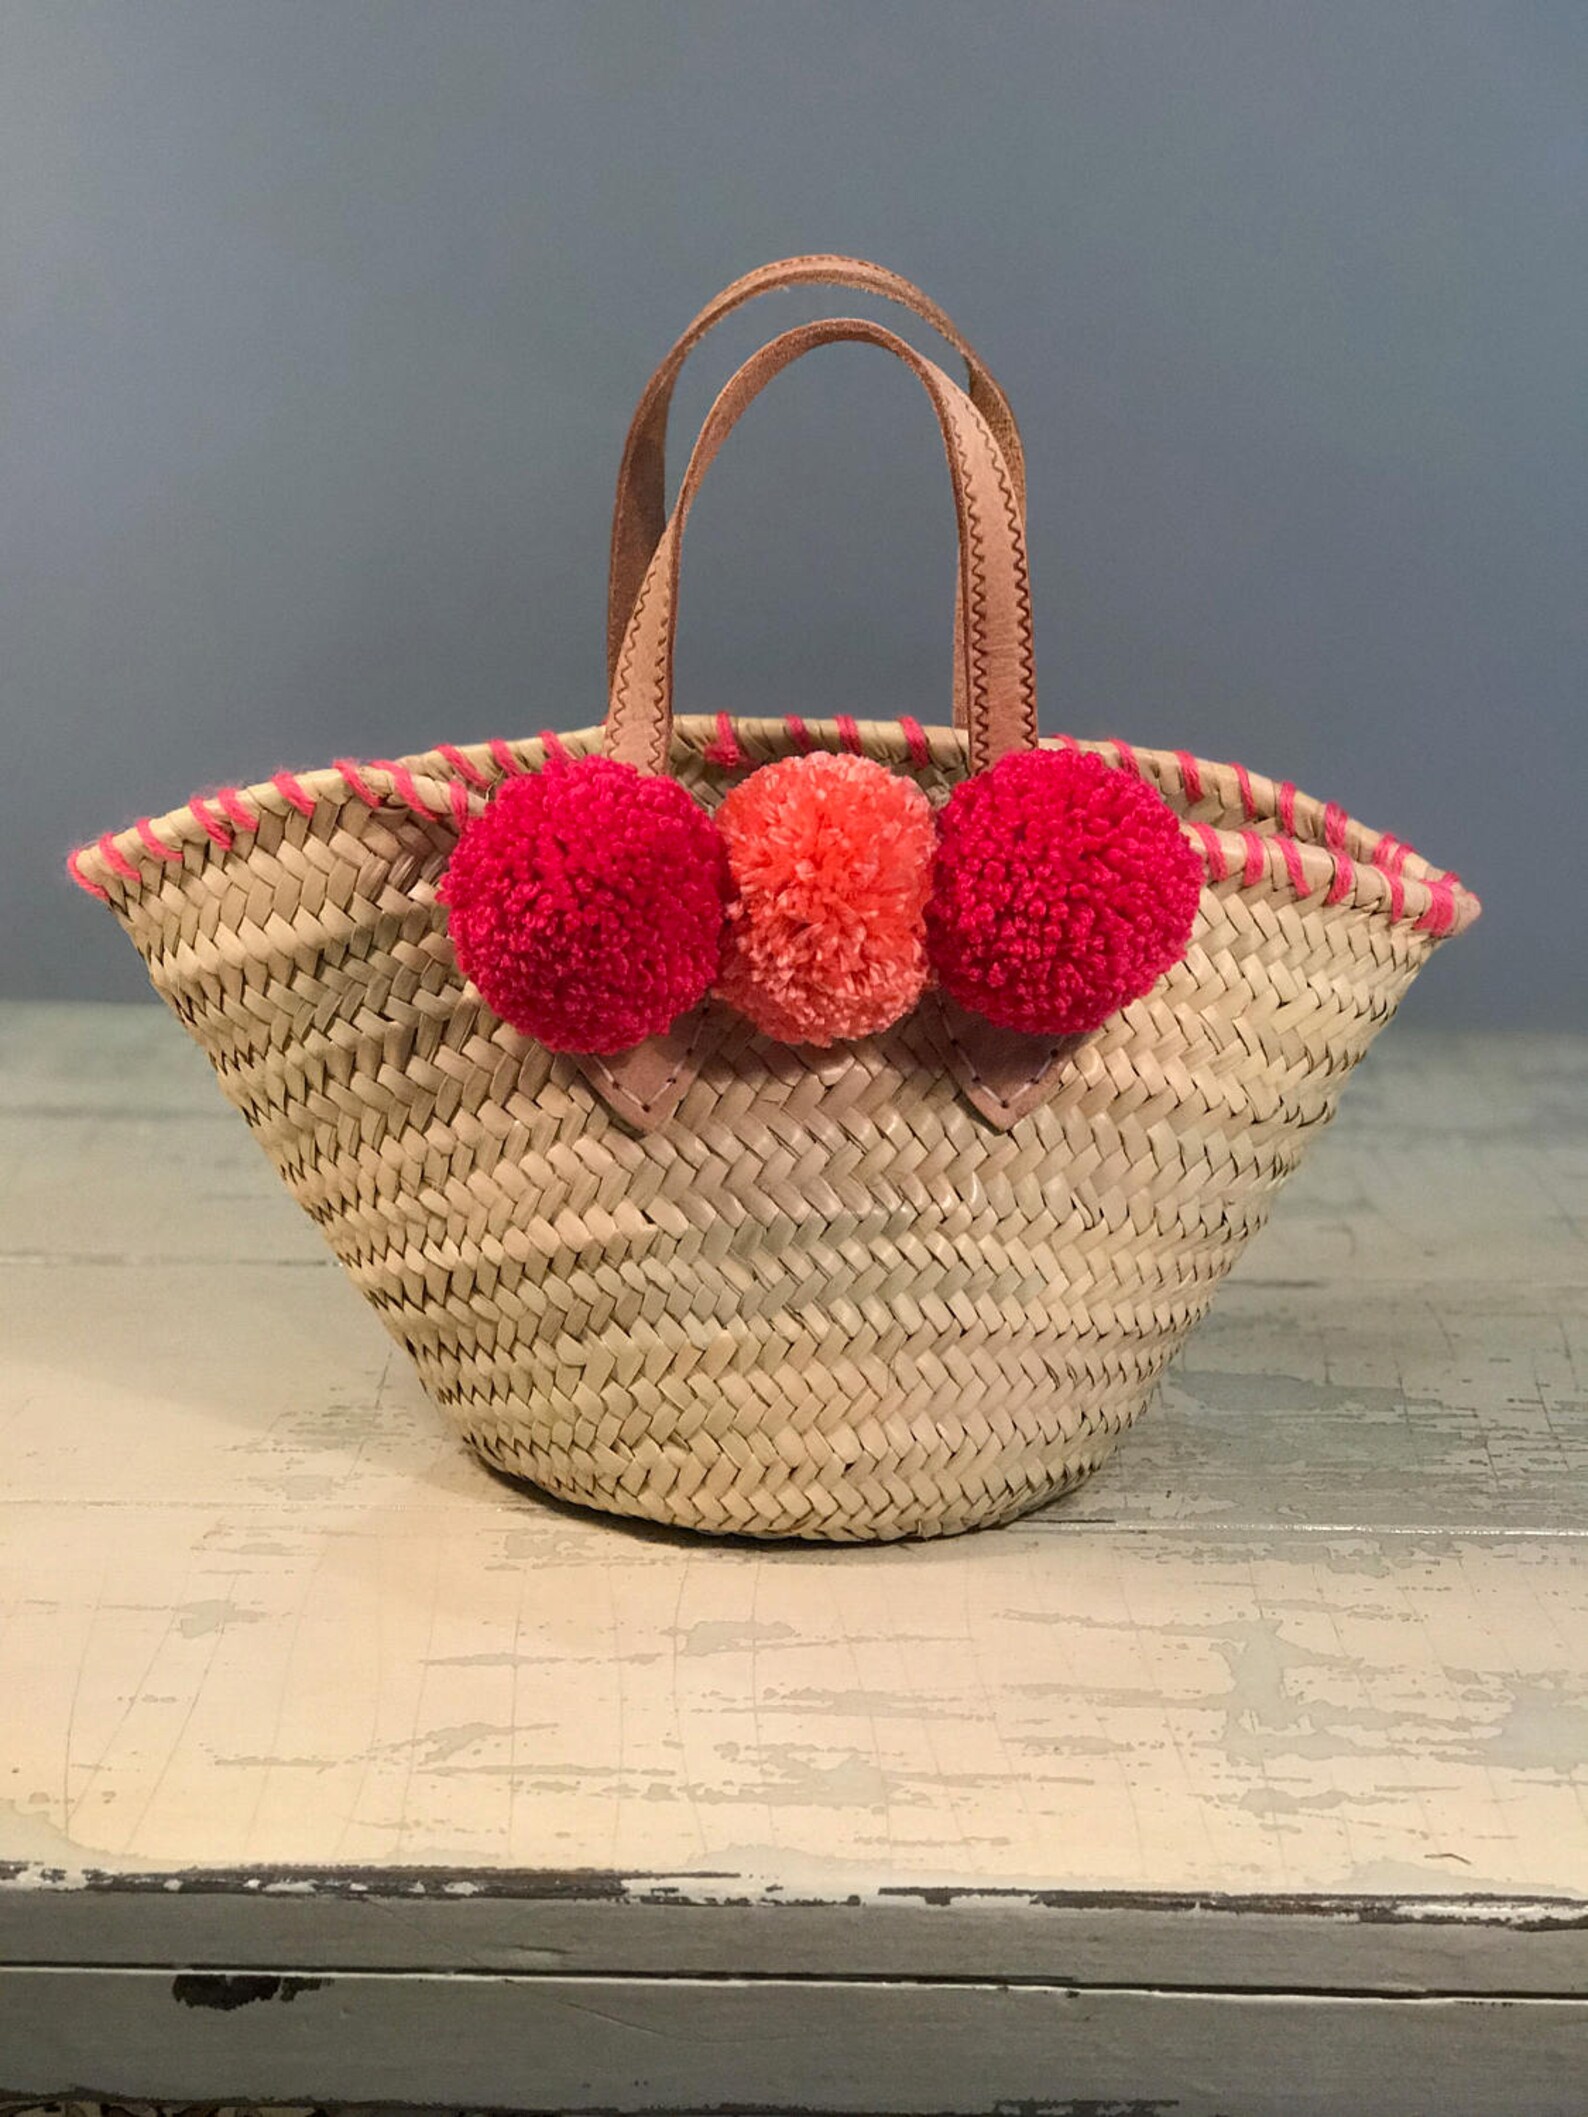 Mini straw basket for adults or kids with pink pom poms | Etsy